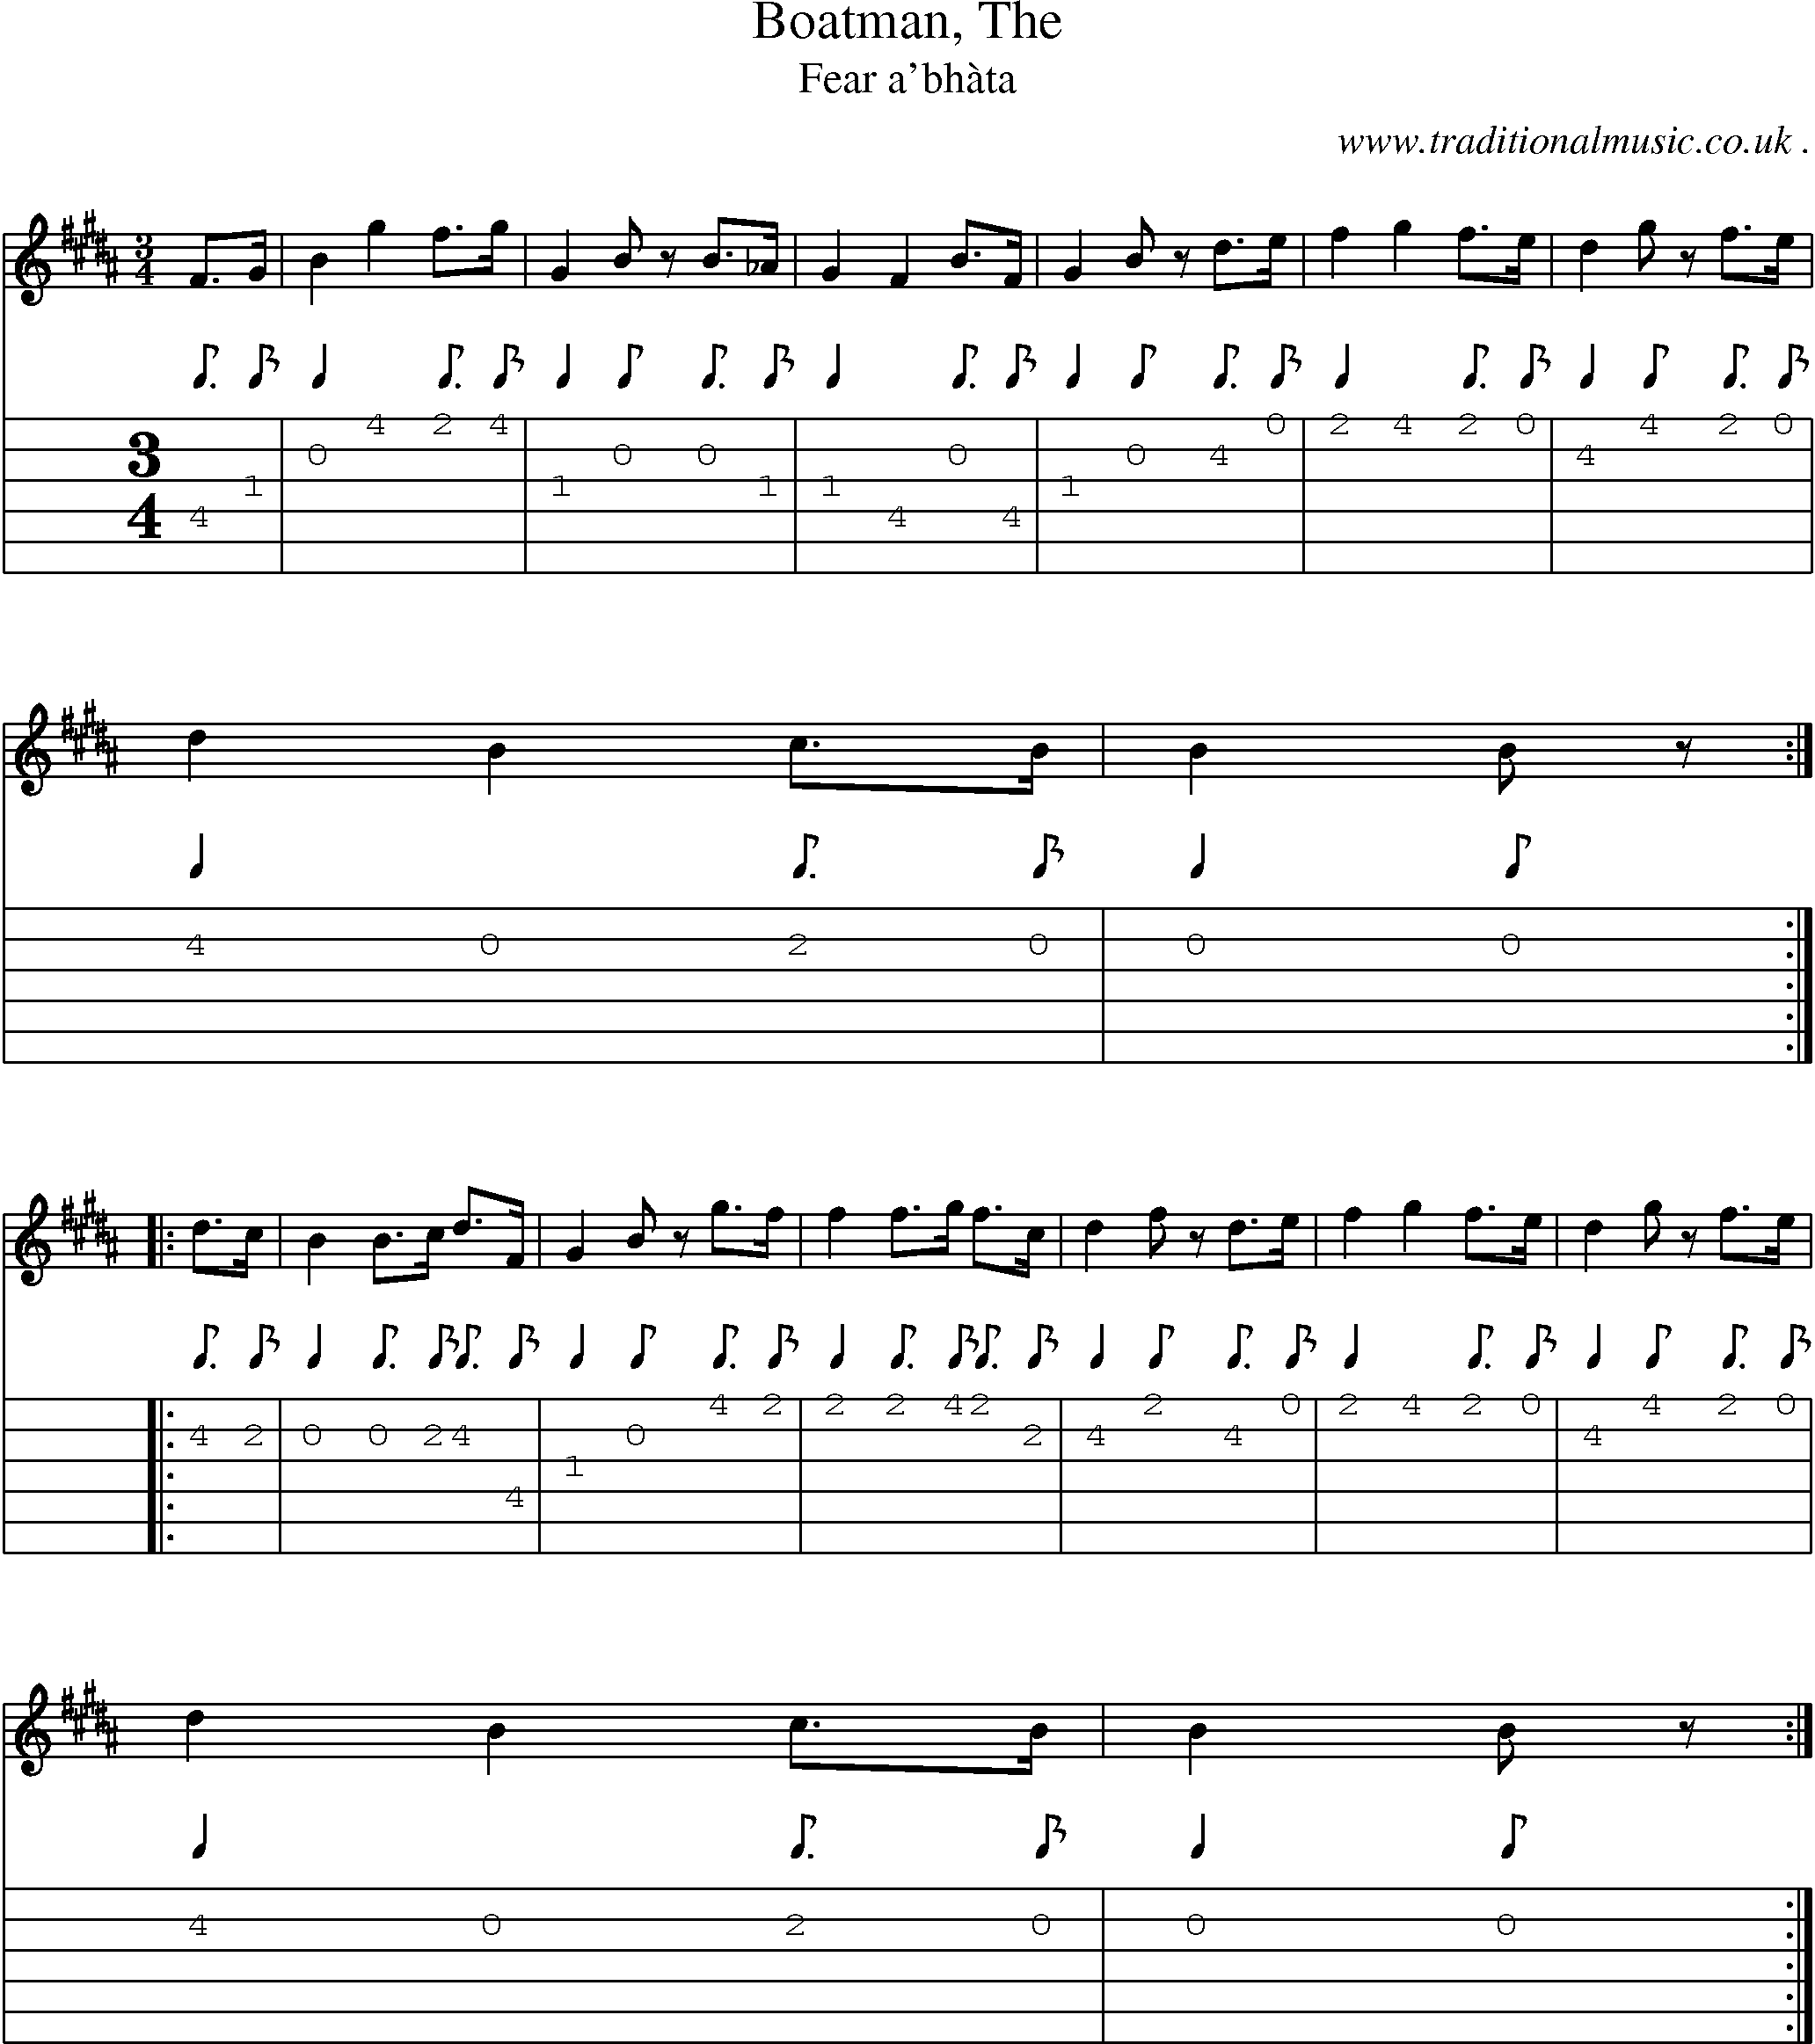 Sheet-music  score, Chords and Guitar Tabs for Boatman The